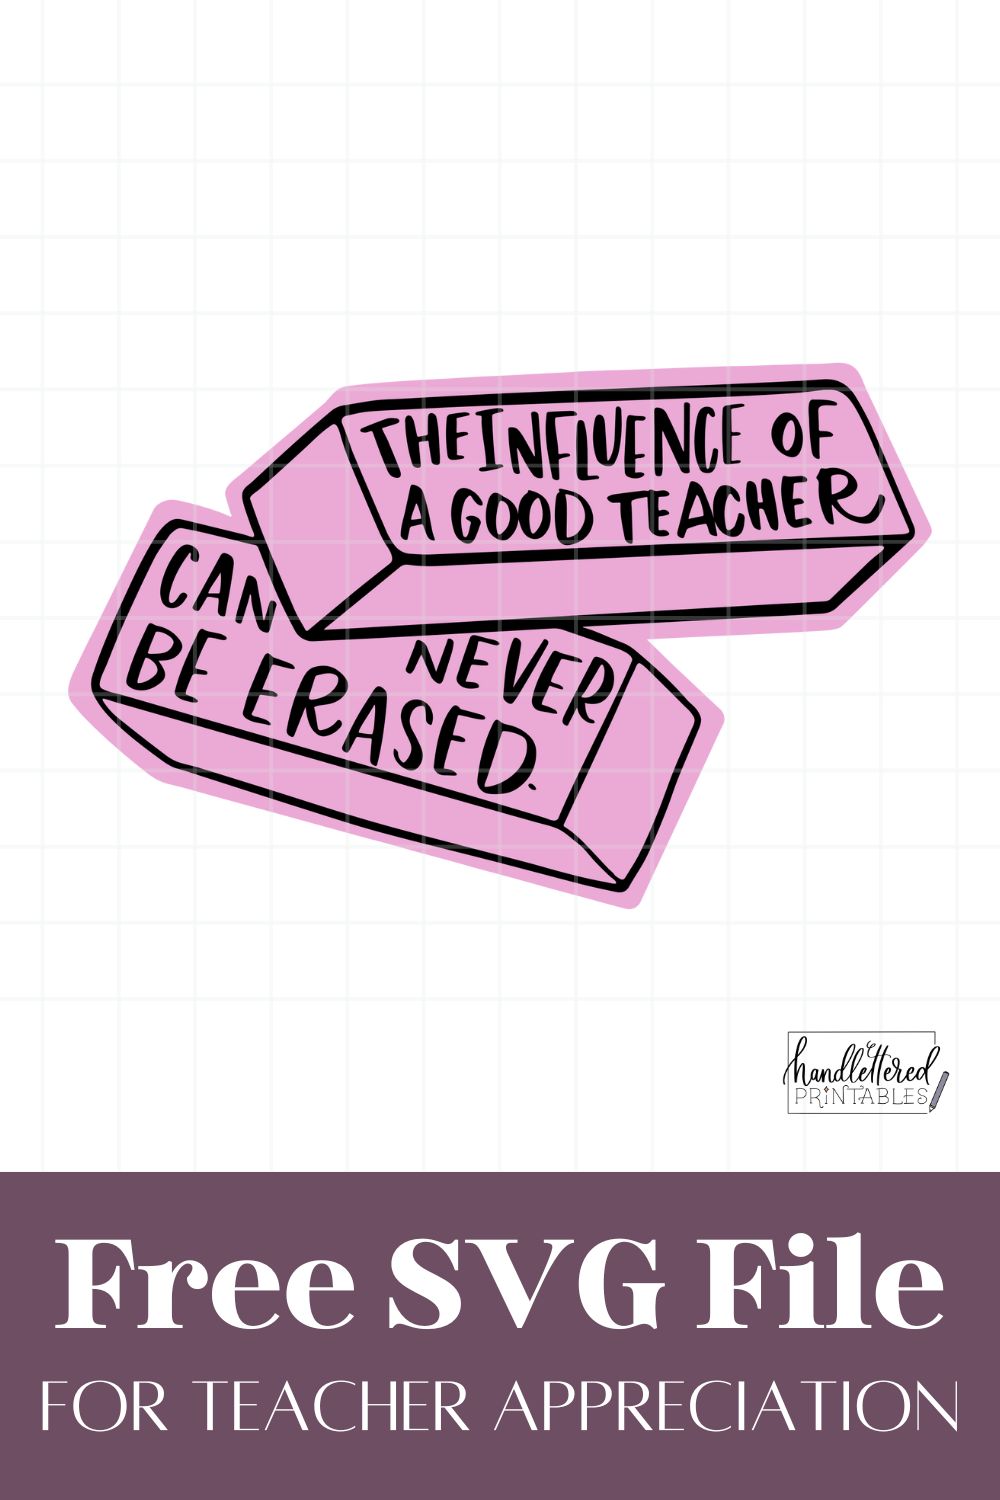 'The influence of a good teacher can never be erased' hand lettered SVG design in black with pink background layer, design is in two eraser shapes text over reads: free SVG file for teacher appreciation